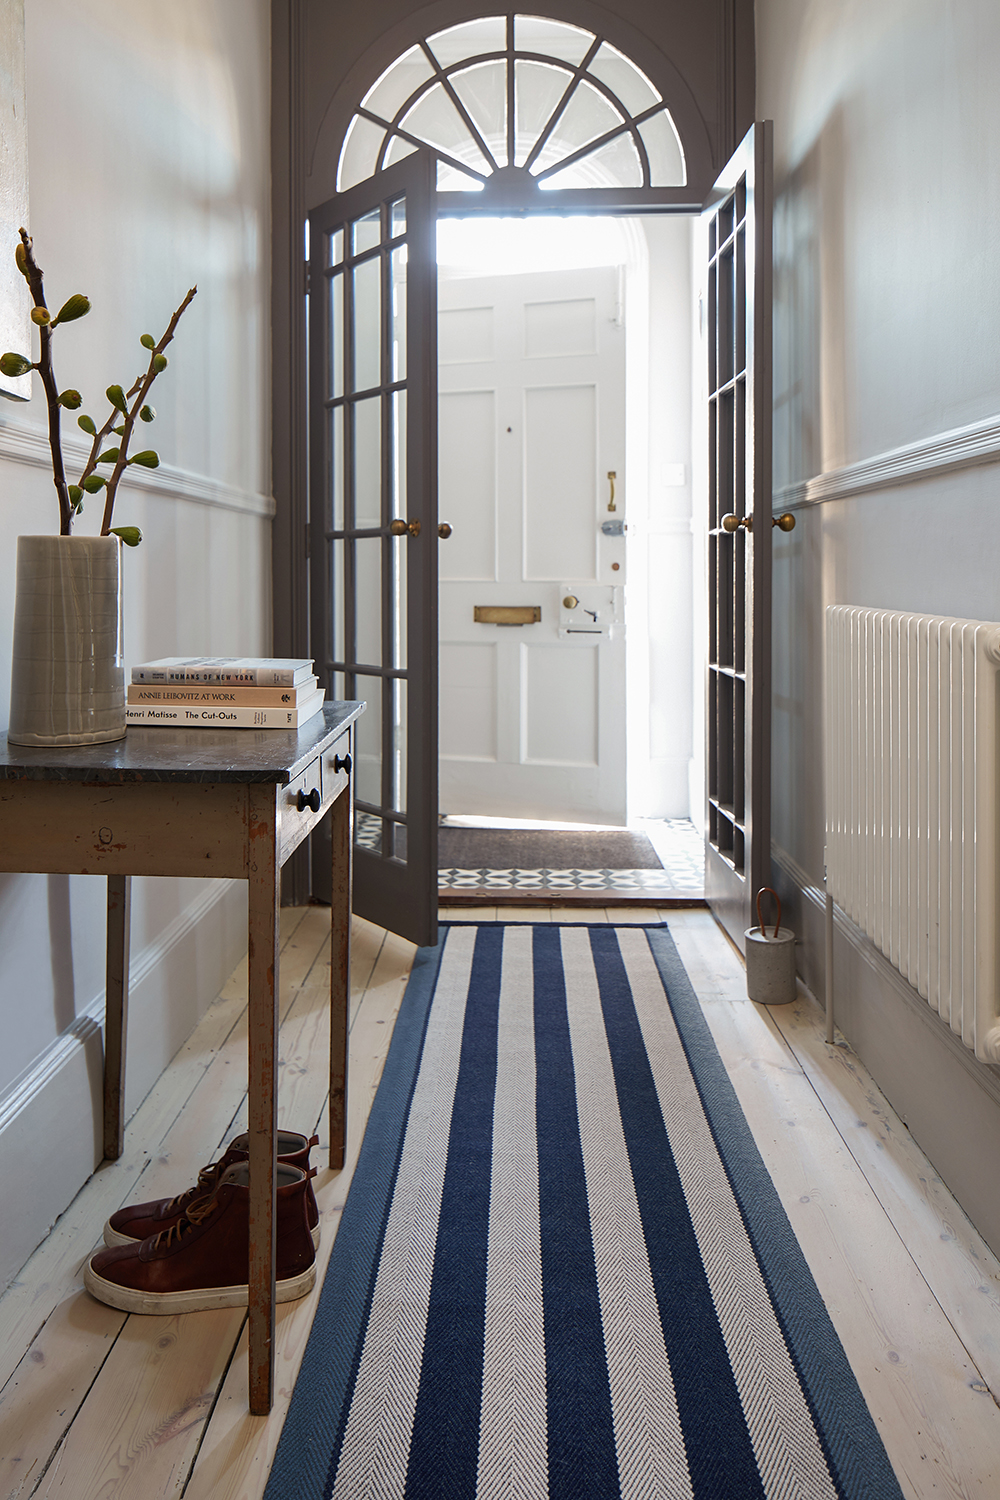 Hallway Rugs 10 Ideas To Add Style, Are Jute Rugs Good For Entryway